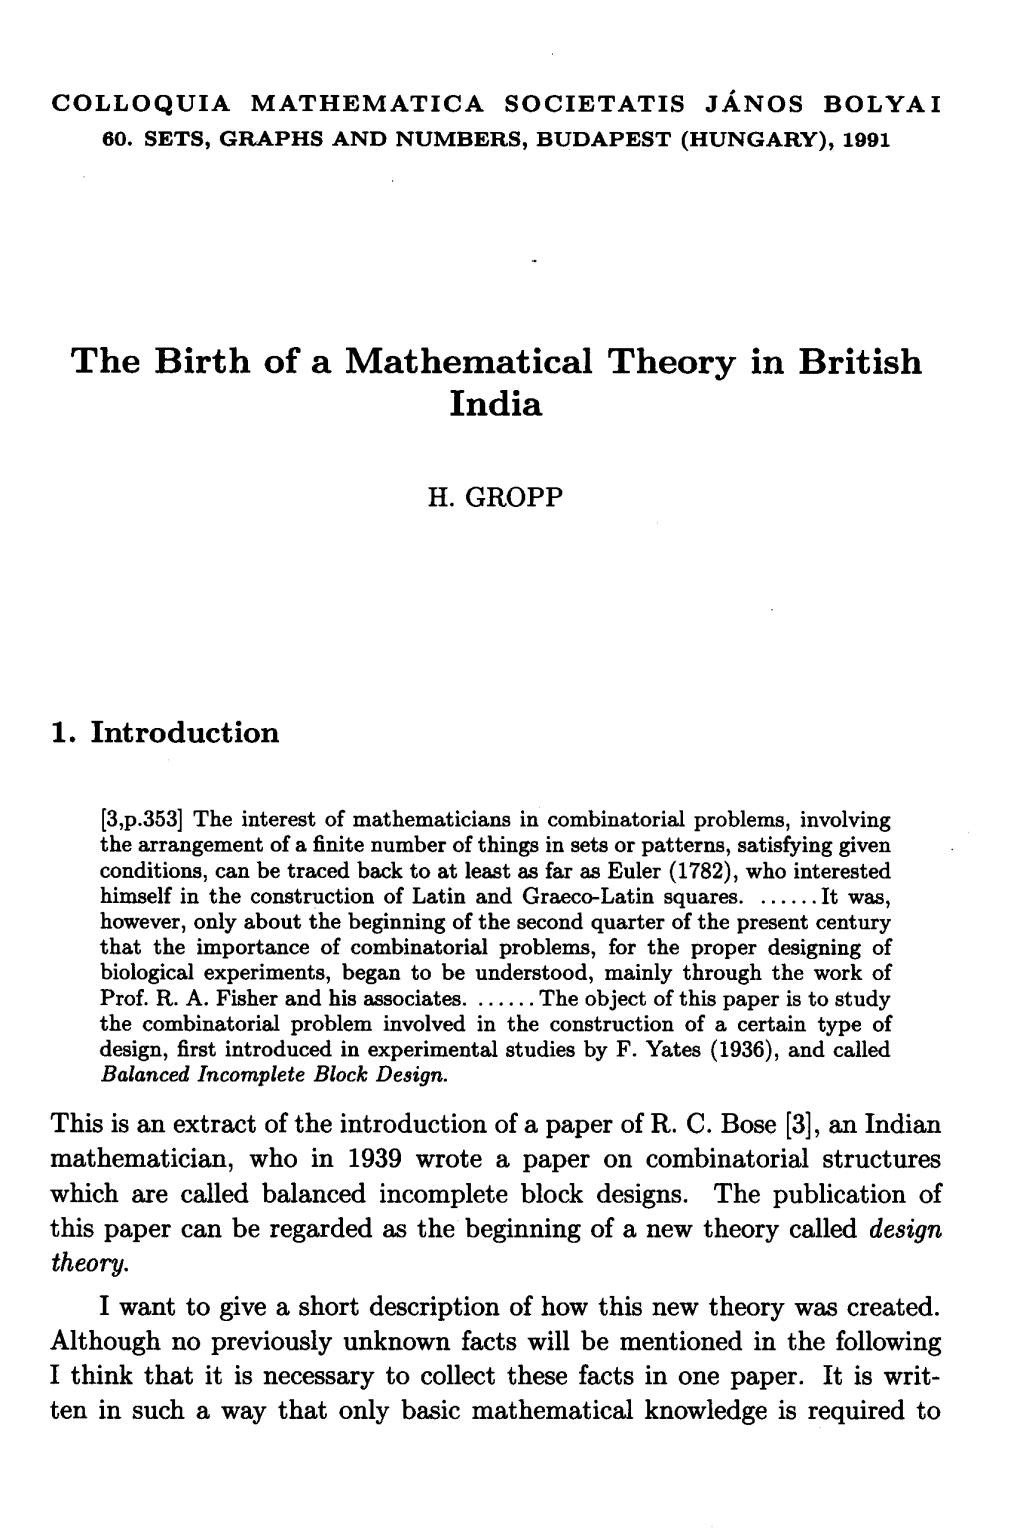 The Birth of a Mathematical Theory in British India